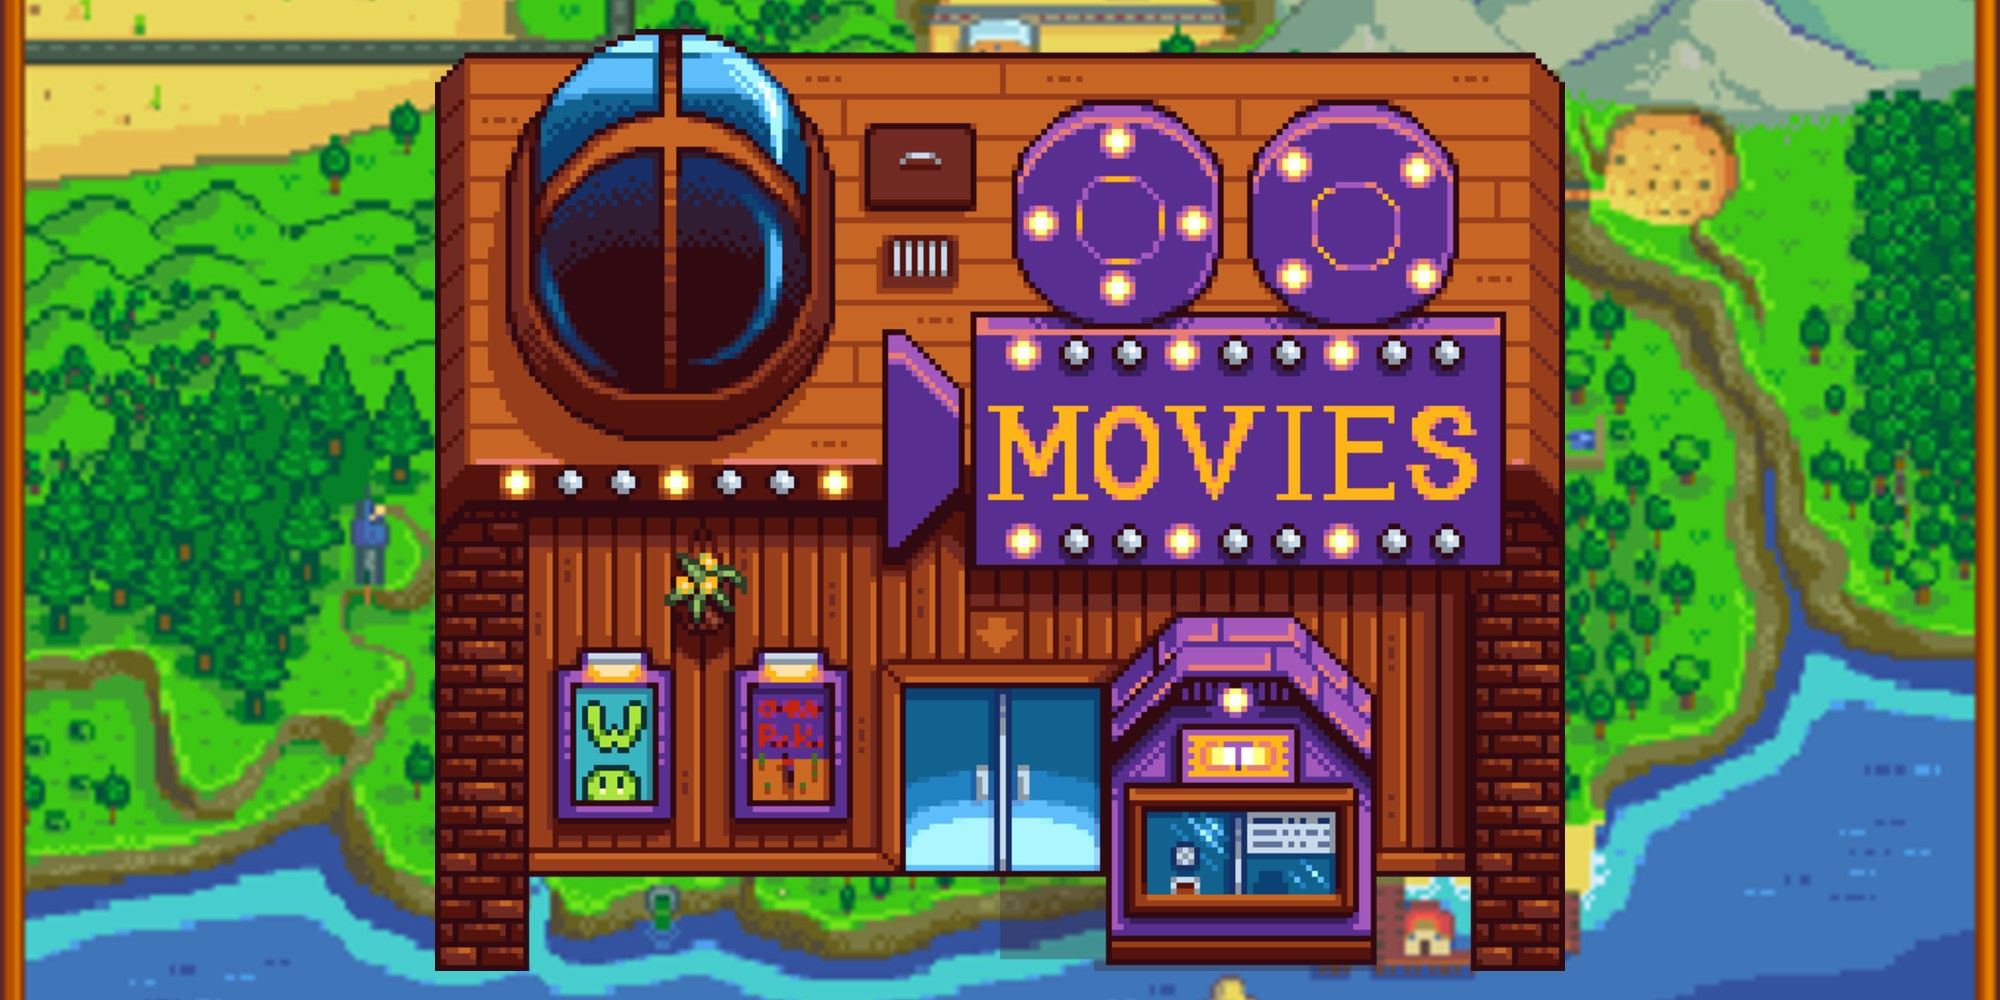 The movie theater as seen in Stardew Valley.